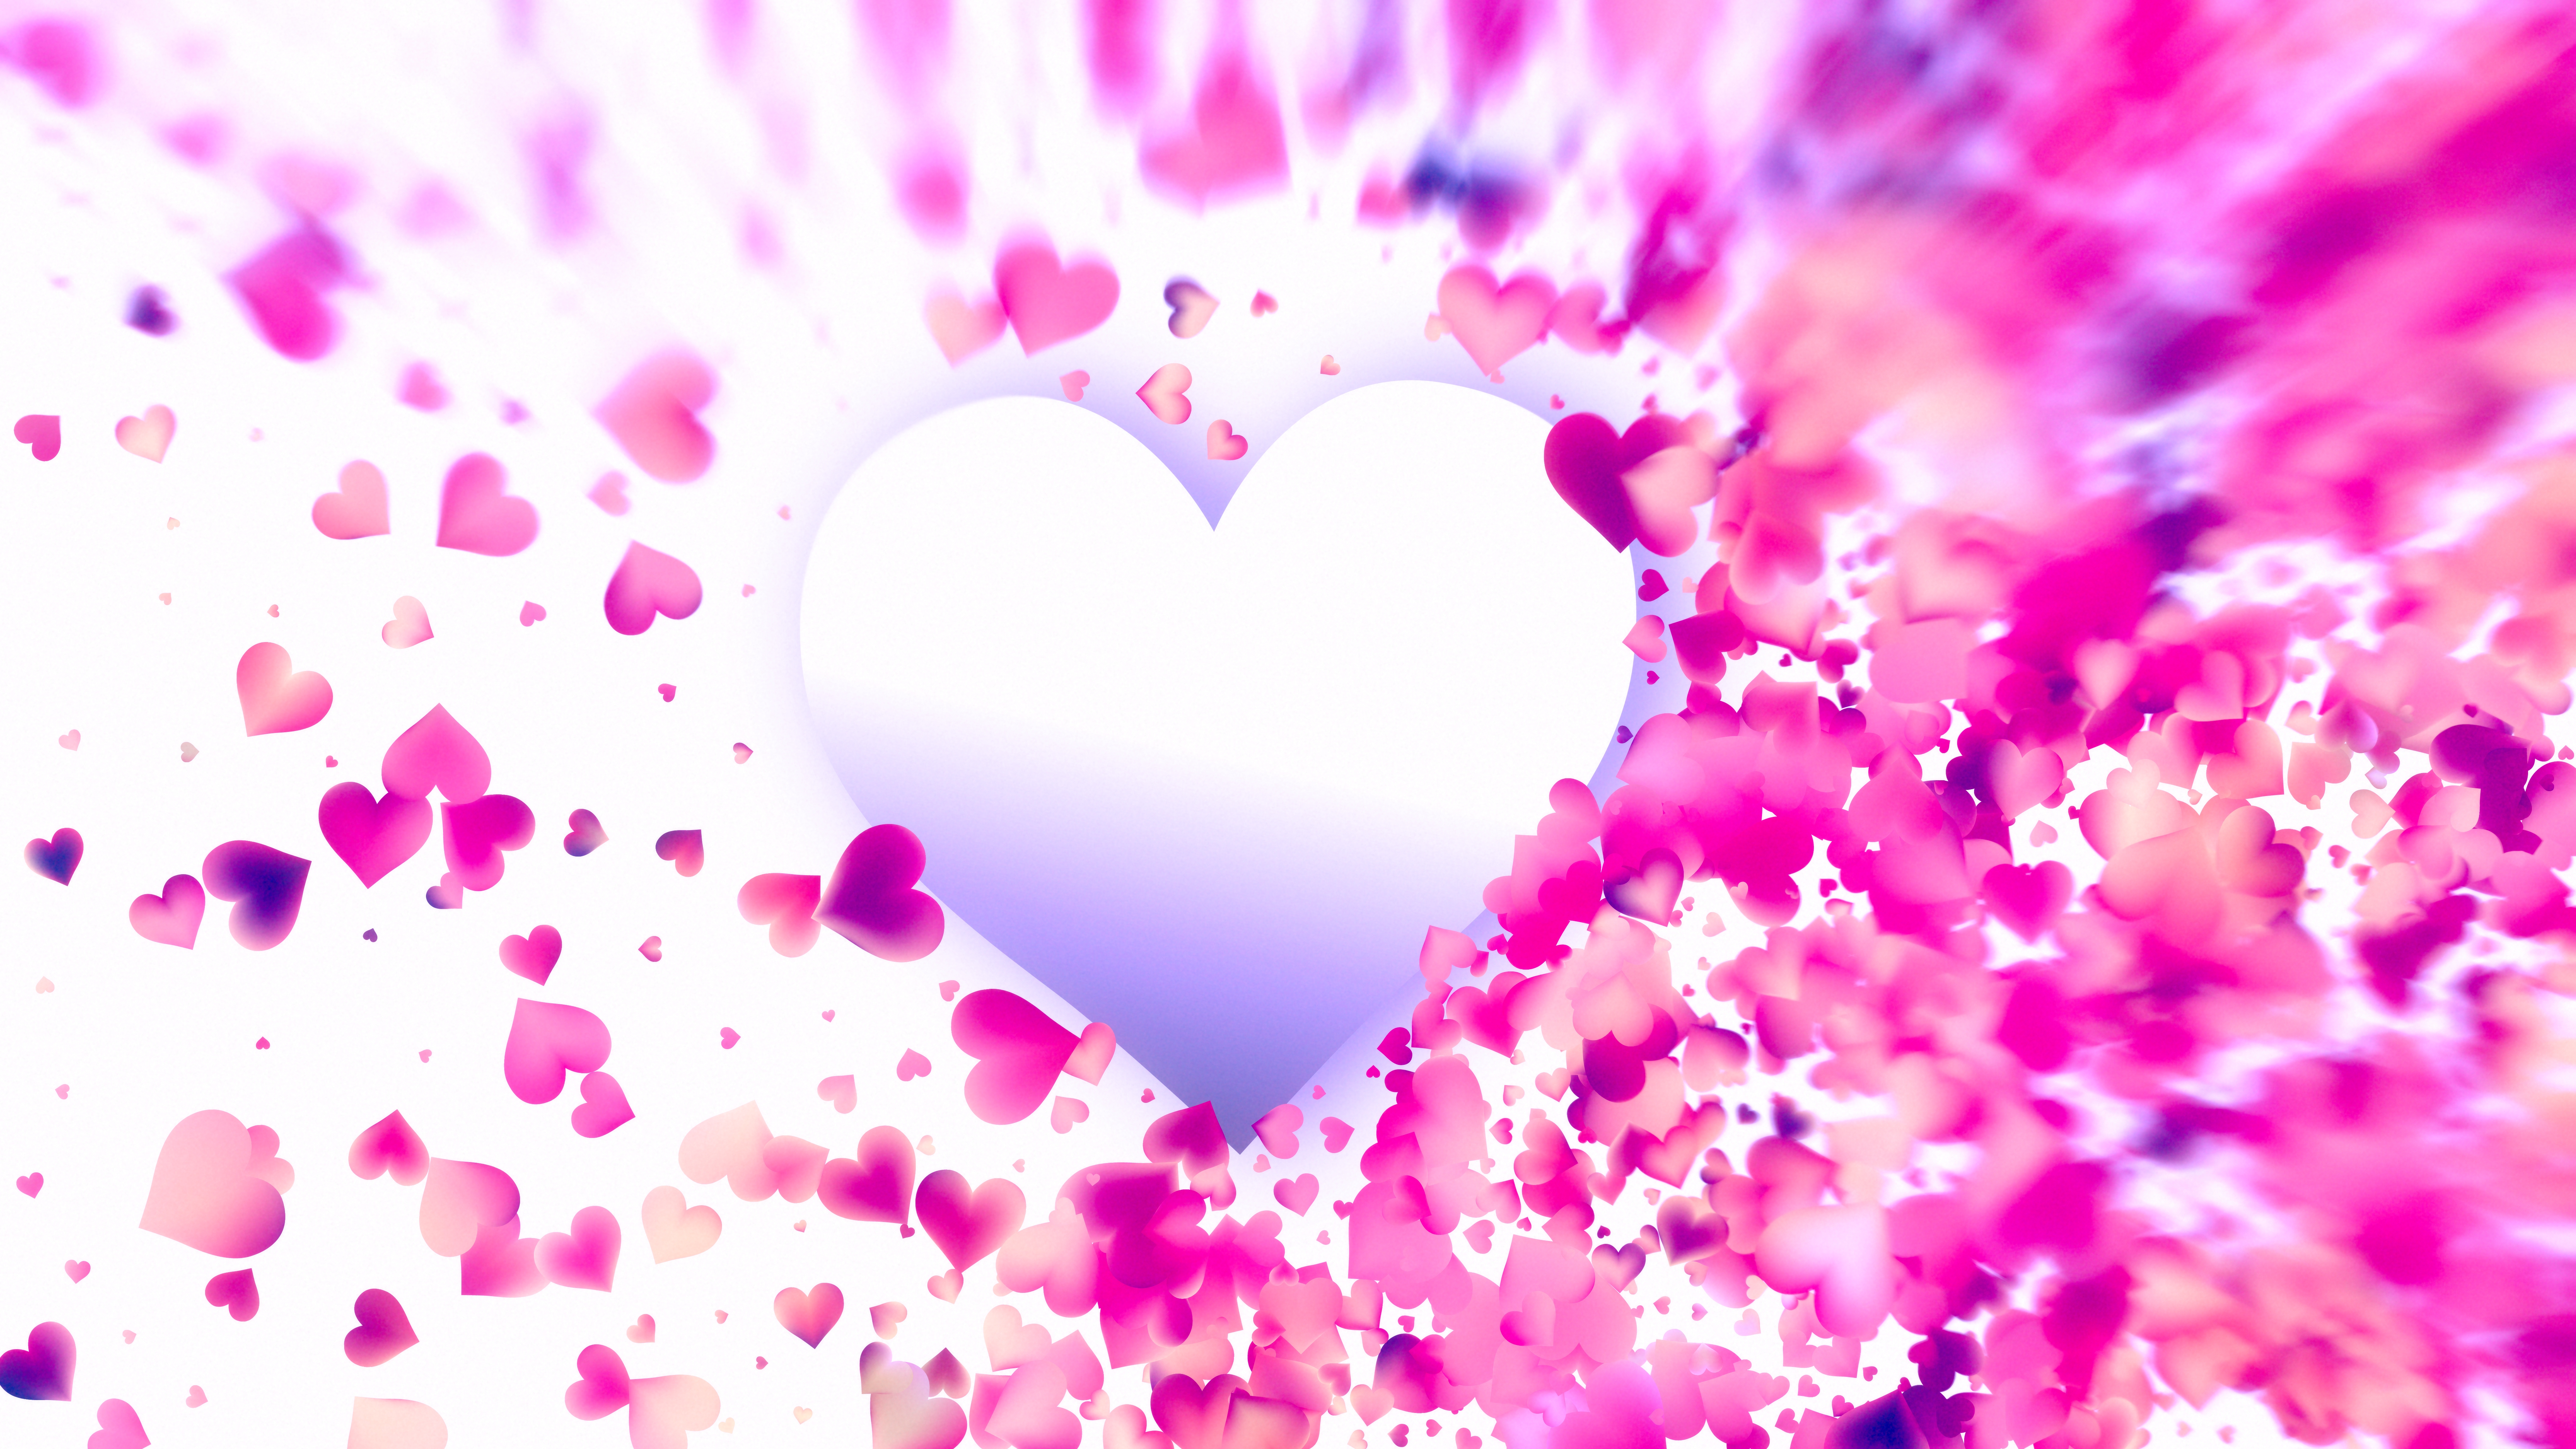 Valentine Background Images  Free iPhone  Zoom HD Wallpapers  Vectors   rawpixel